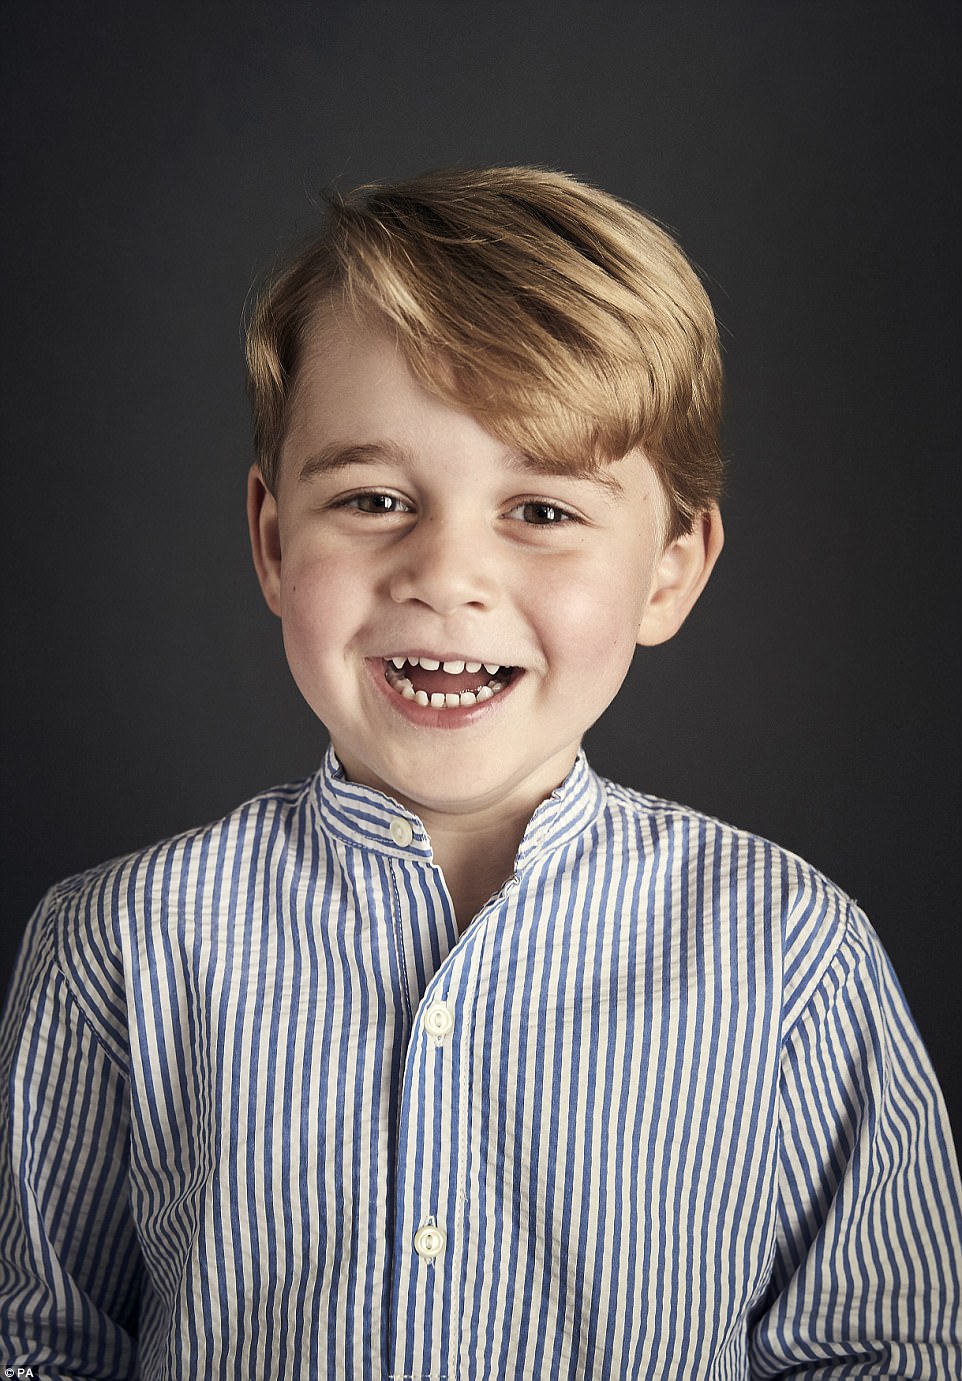 428D003300000578-4718542-This_new_image_was_released_to_celebrate_Prince_George_s_fourth_-a-42_1500671133553